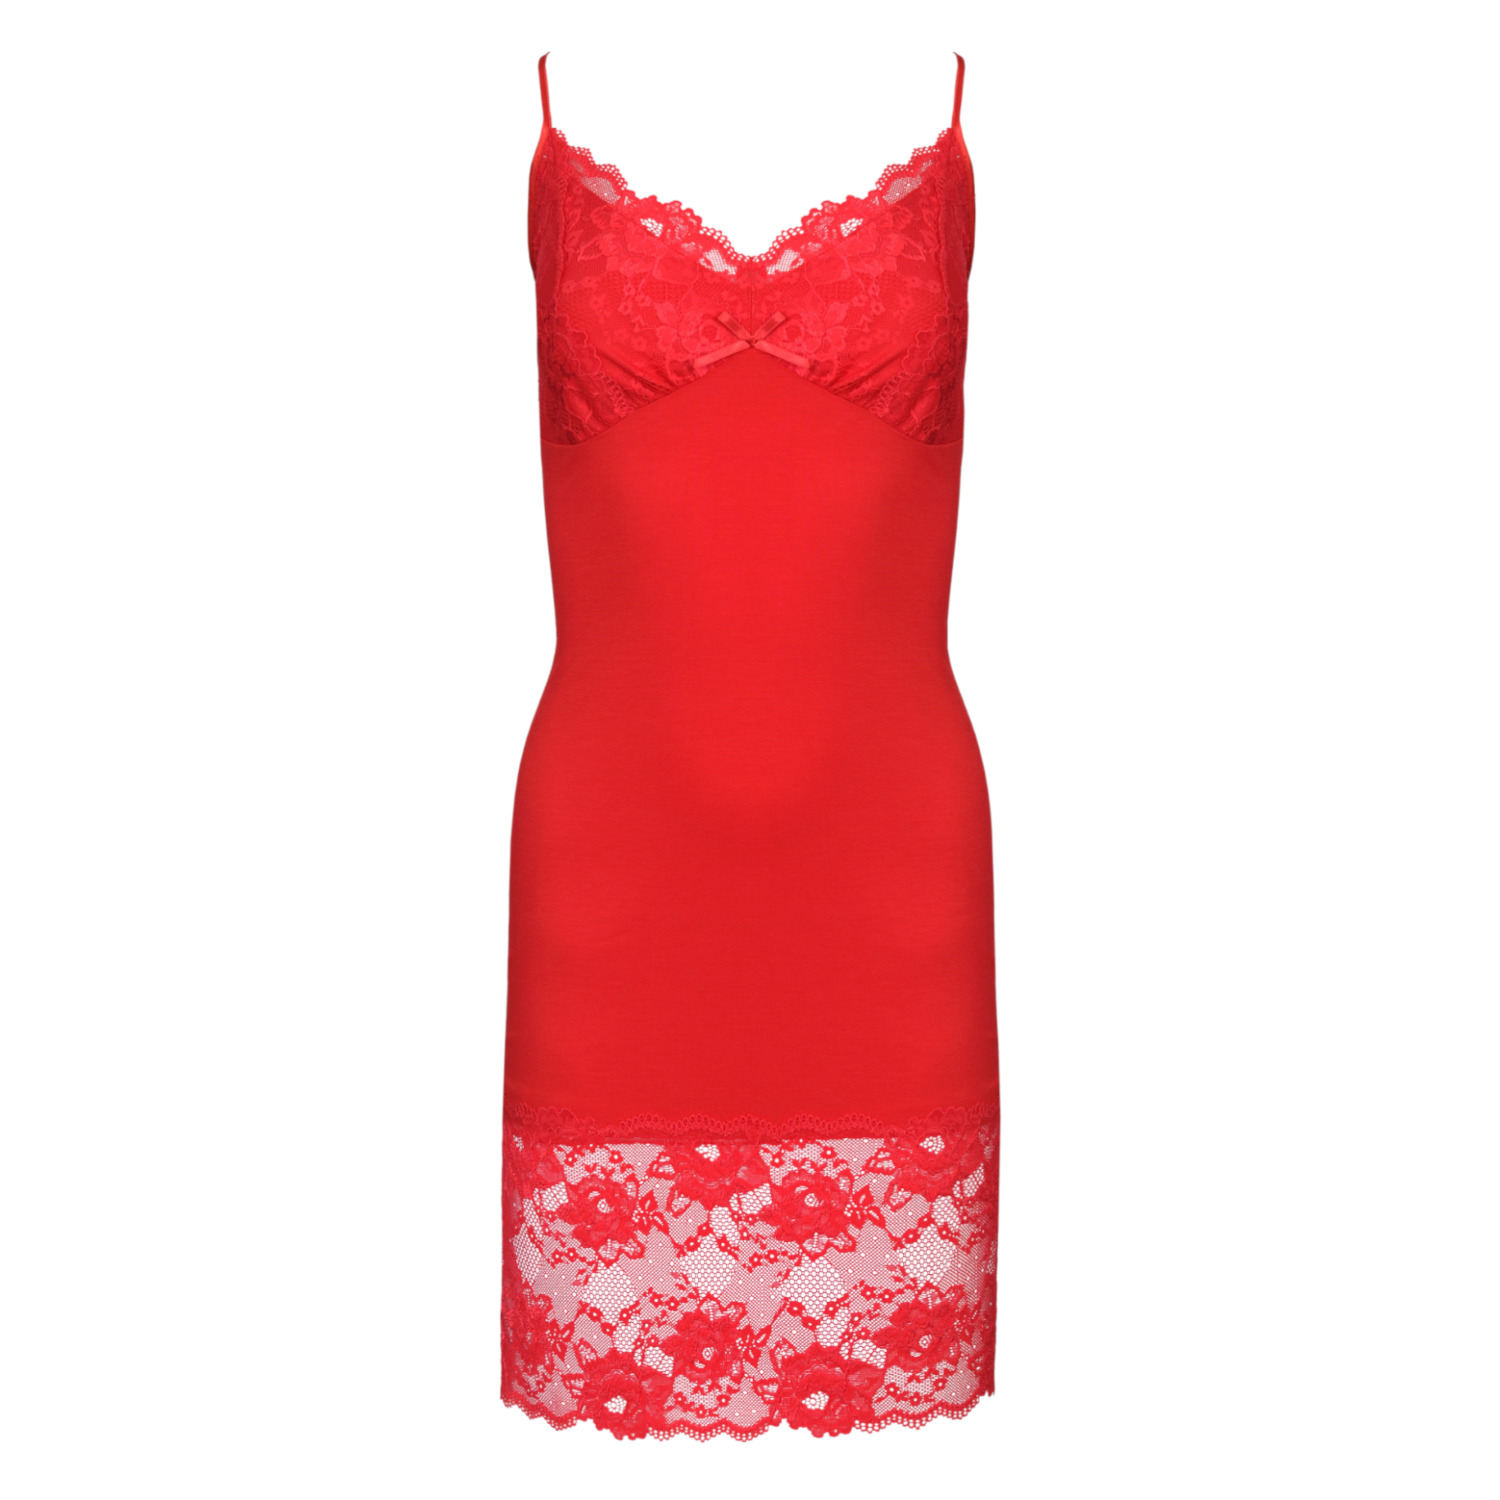 Women’s Classic Lace Chemise Nightdress - Red Extra Small Oh!Zuza Night & Day